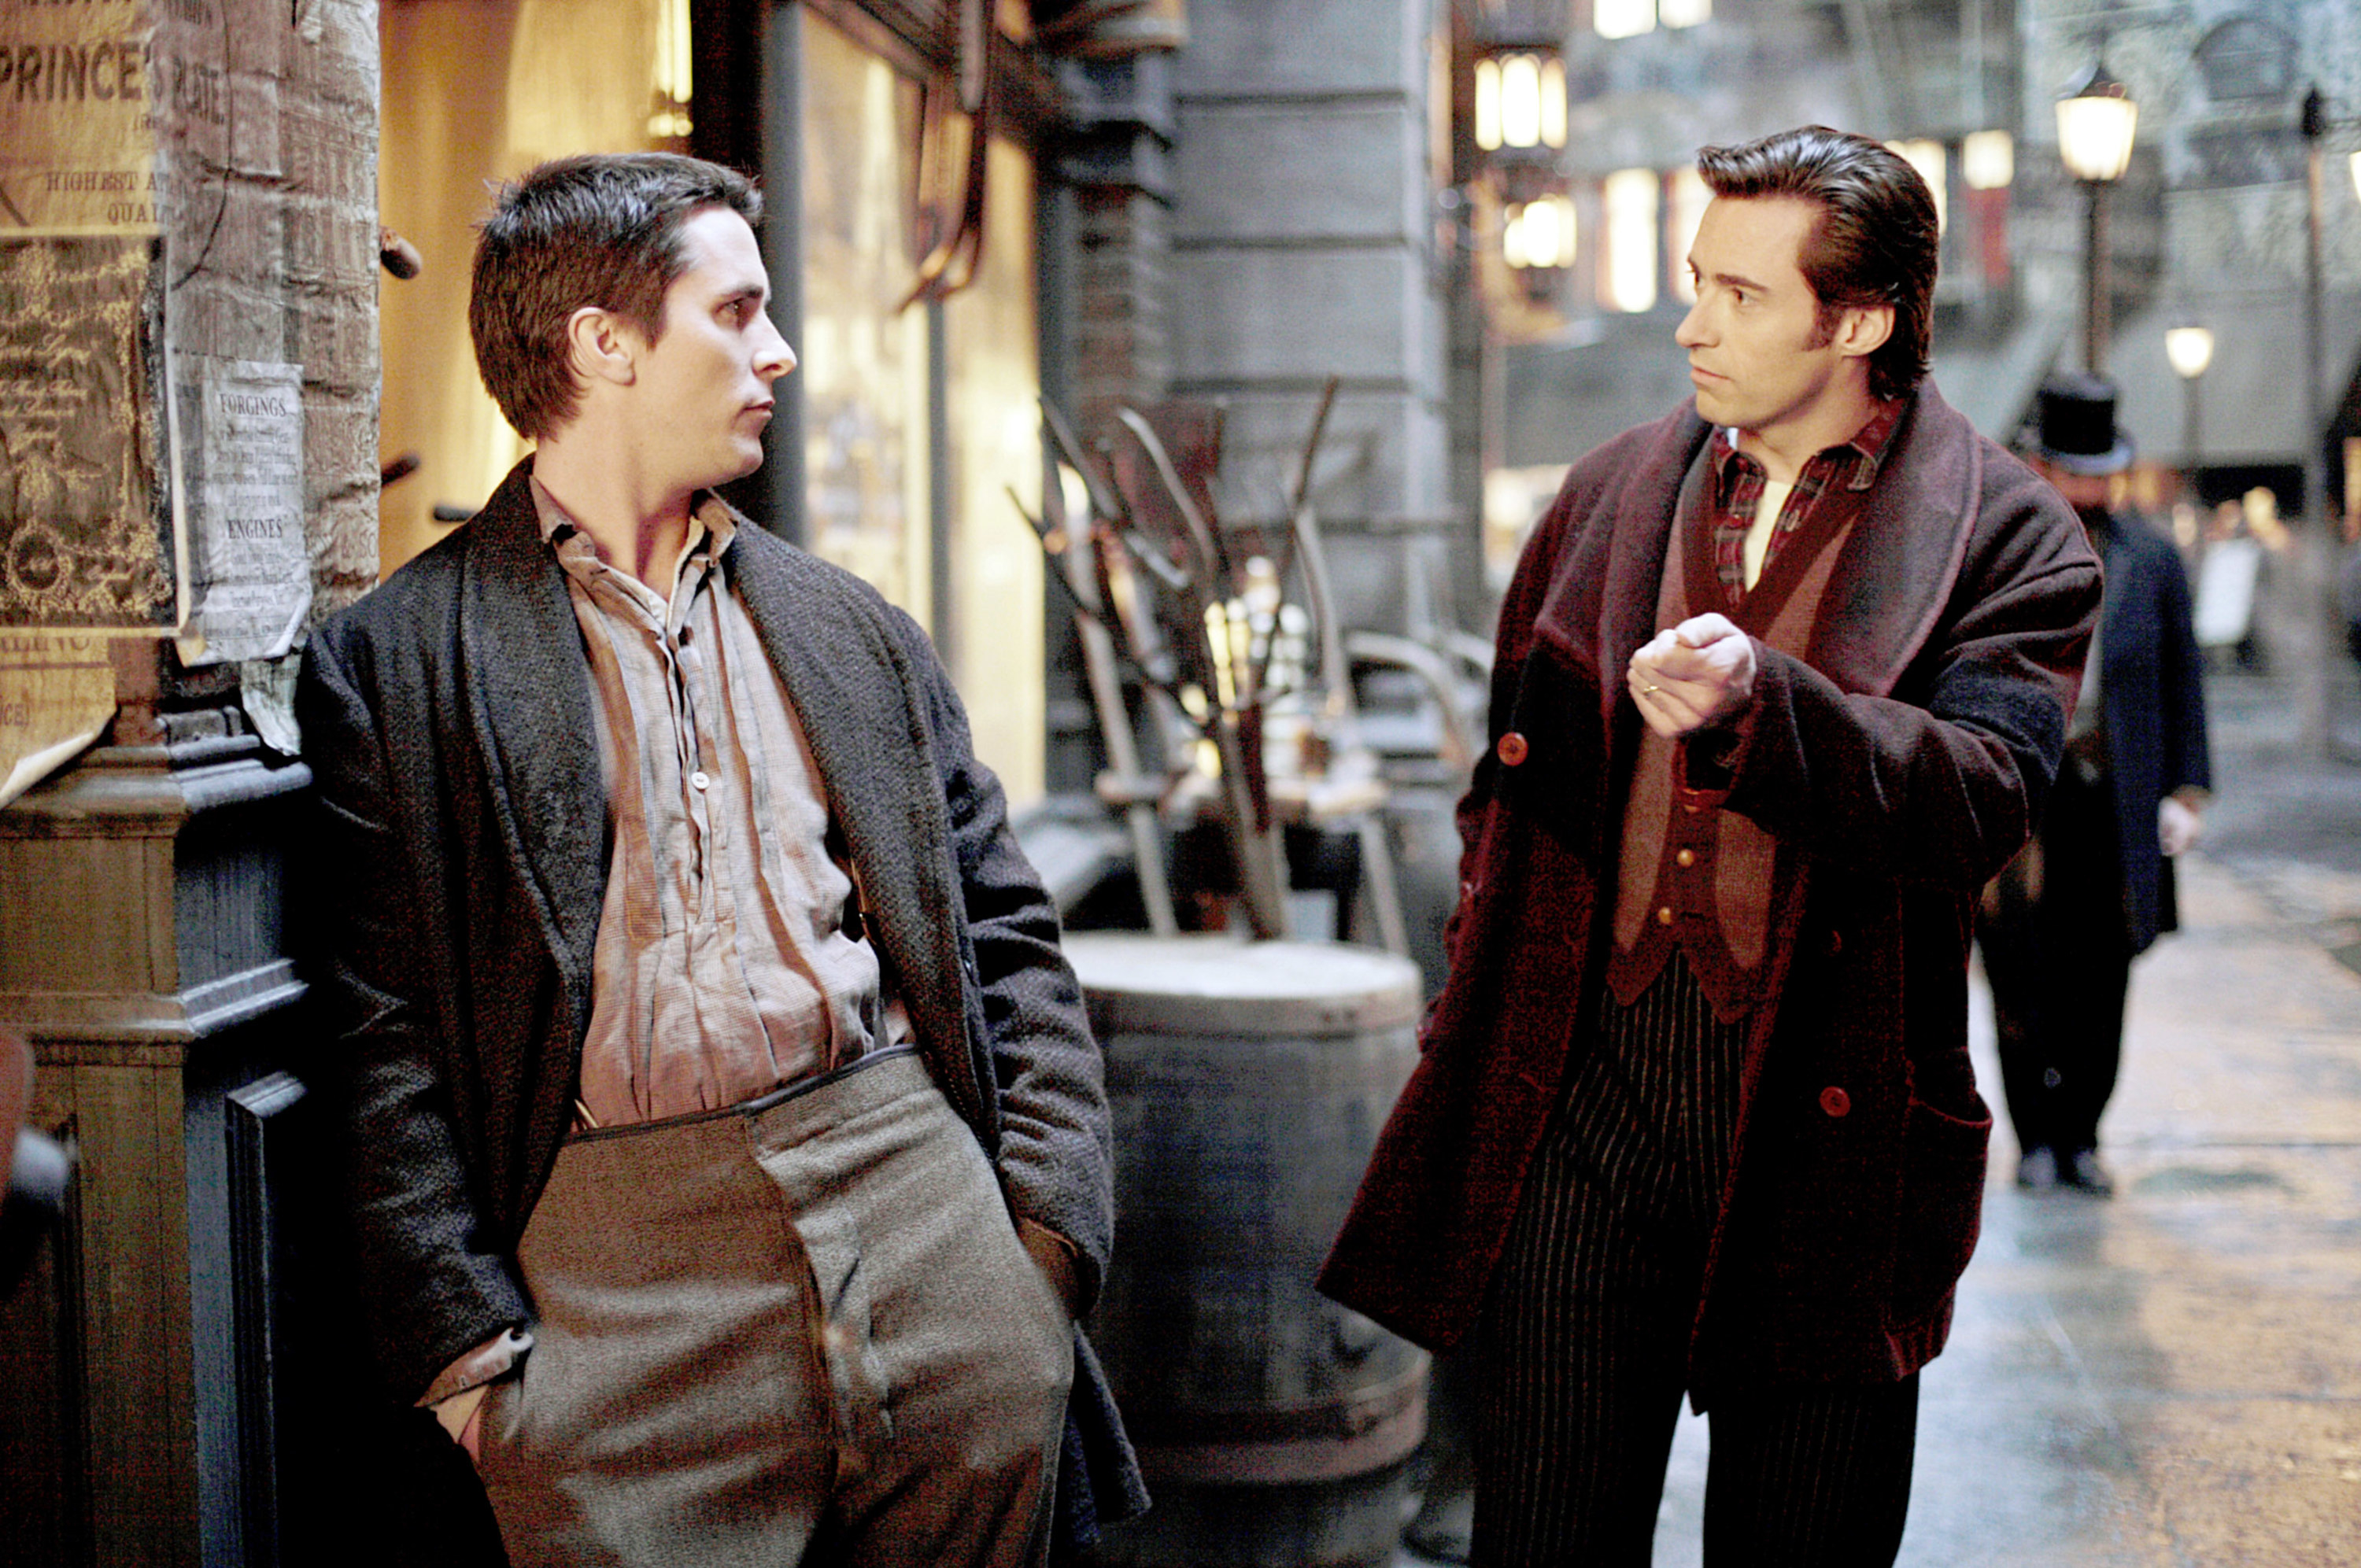 Christian Bale, Hugh Jackman in 19th century clothing, talking in the street